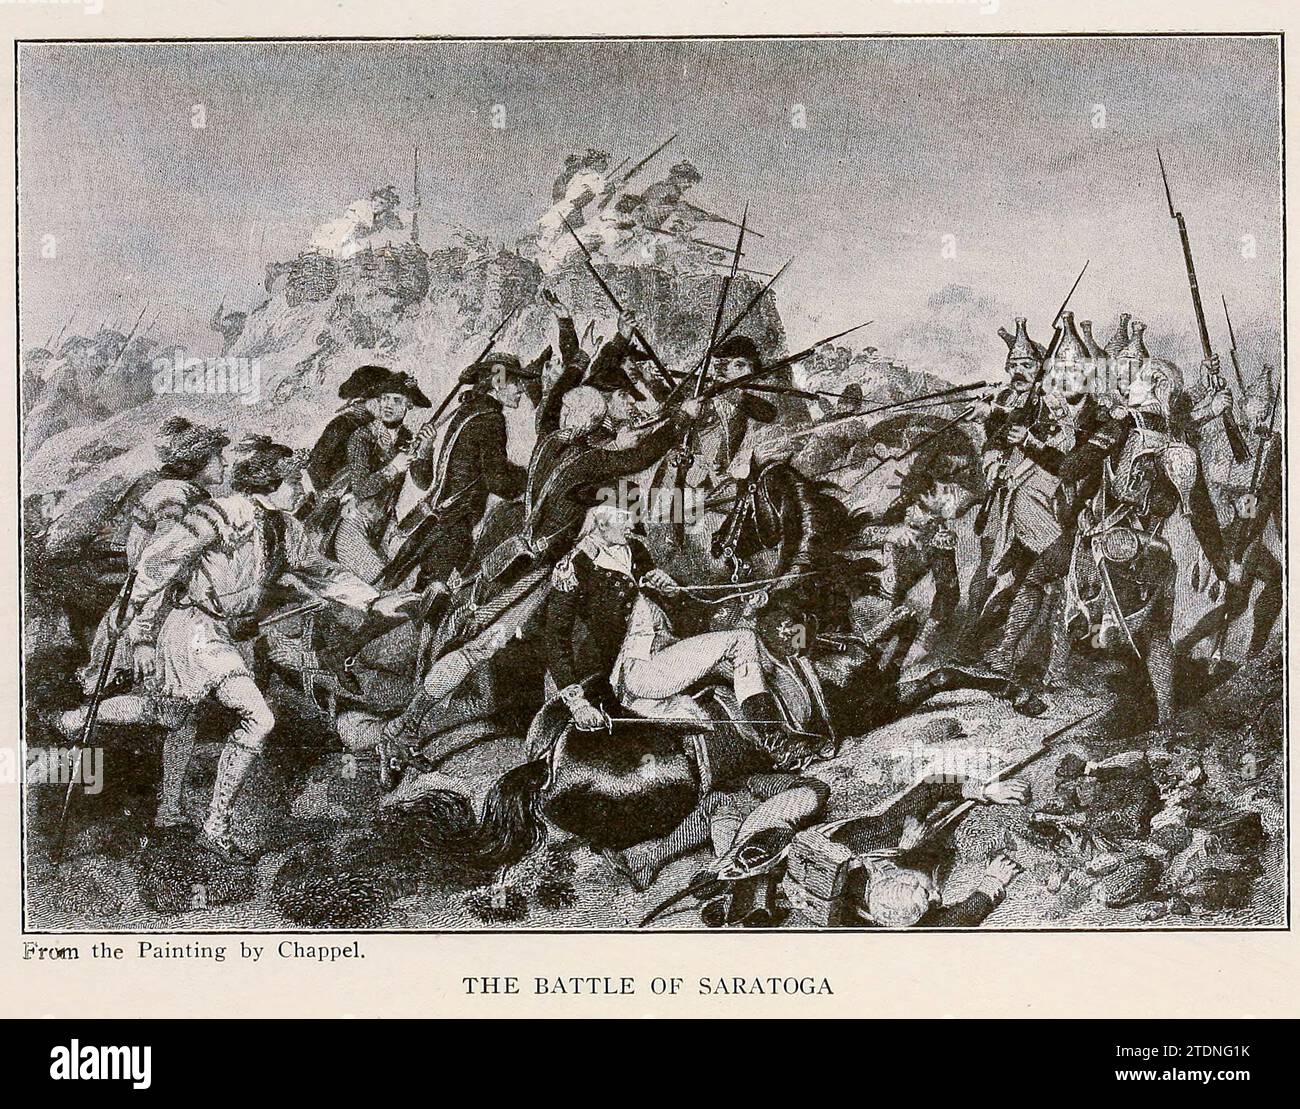 The Battle of Saratoga 1777 from the book A wonderland of the East, comprising the lake and mountain region of New England and eastern New York; a book for those who love to wander among beautiful lakes and rivers, valleys and mountains, or in places made famous by historic men and events; to which is added an afterword on the worth-while in this wonderland of the East, with some suggestions to motor-tourists on how best to find it by Kitchin, William Copeman. Publication date 1920 Publisher: The Page company Stock Photo